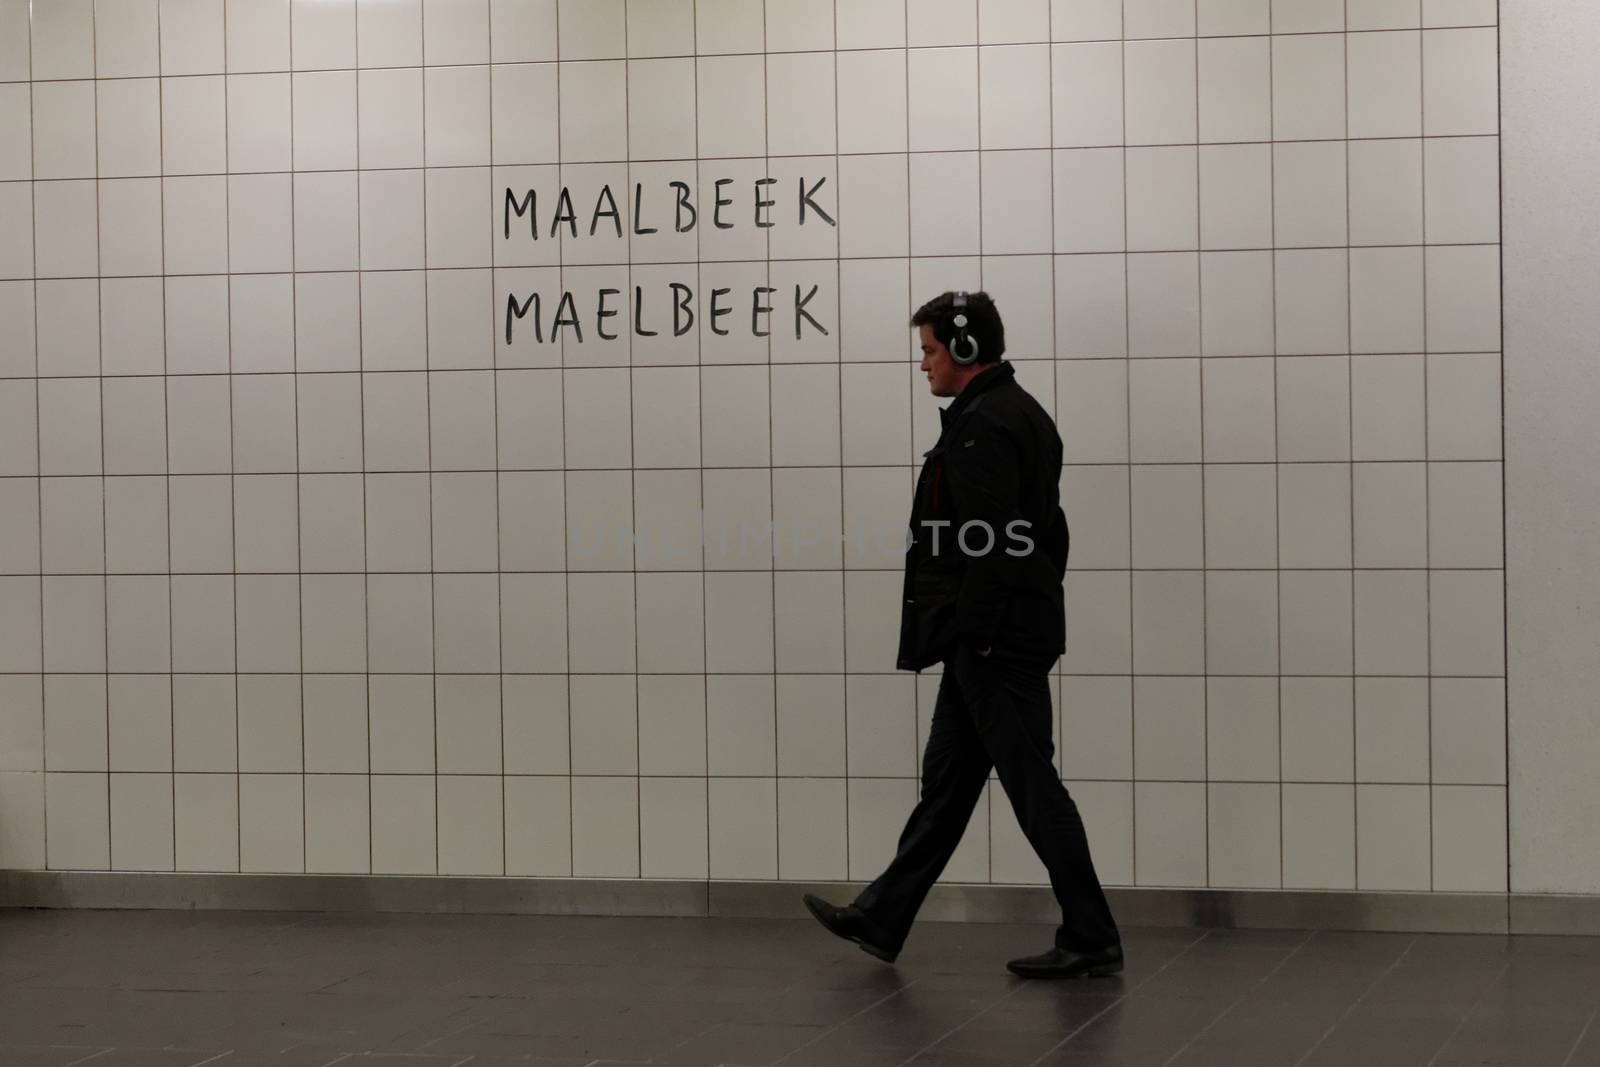 BELGIUM, Brussels : Passagers walk during the reopening of the Maelbeek - Maalbeek metro station on on April 25, 2016 in Brussels, which was closed since the 22 March attacks in the Belgian capital.Maelbeek - Maalbeek metro station was hit by one of the three Islamic State suicide bombers who struck Brussels airport and metro on March 22, killing 32 people and injuring hundreds.